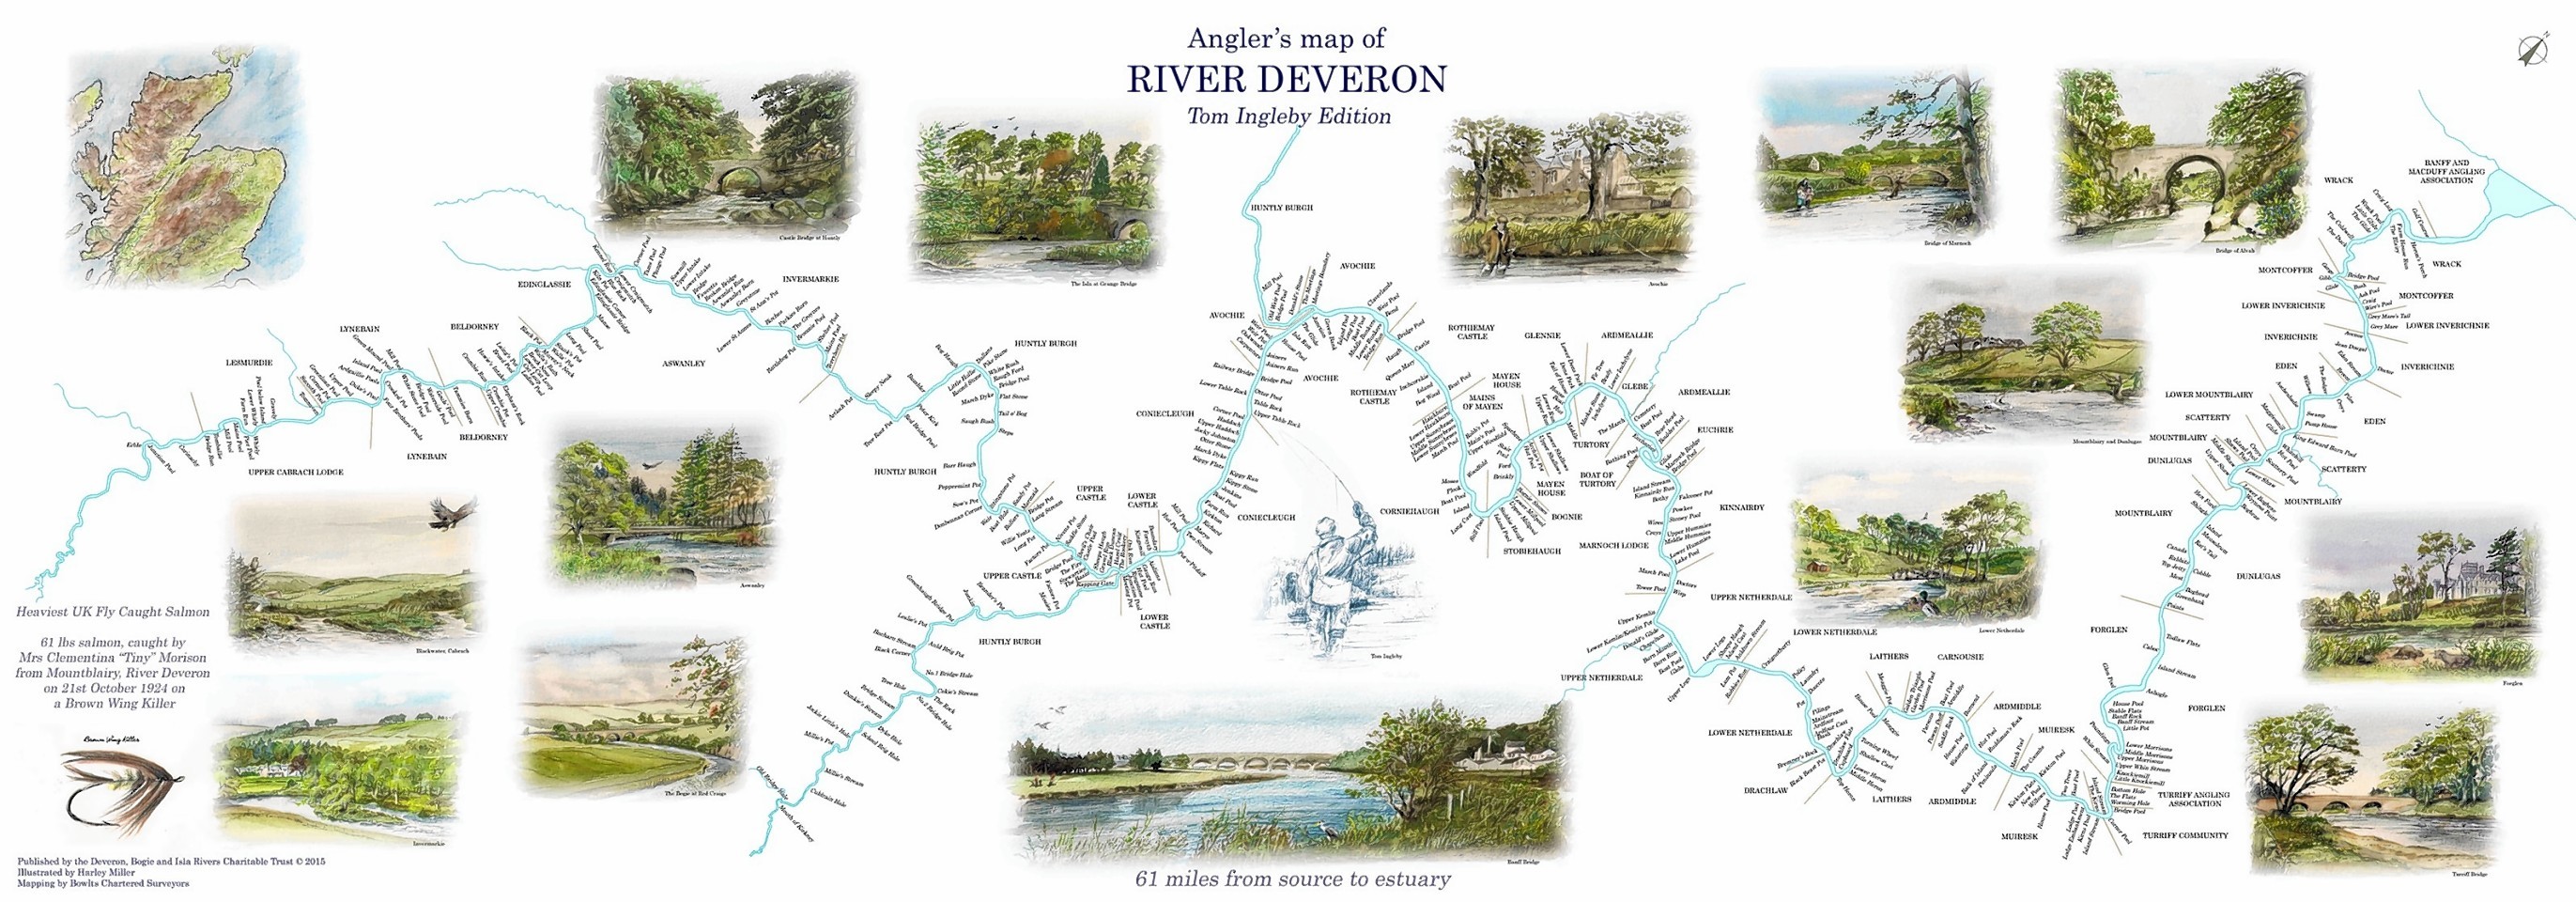 The map plots the River Deveron